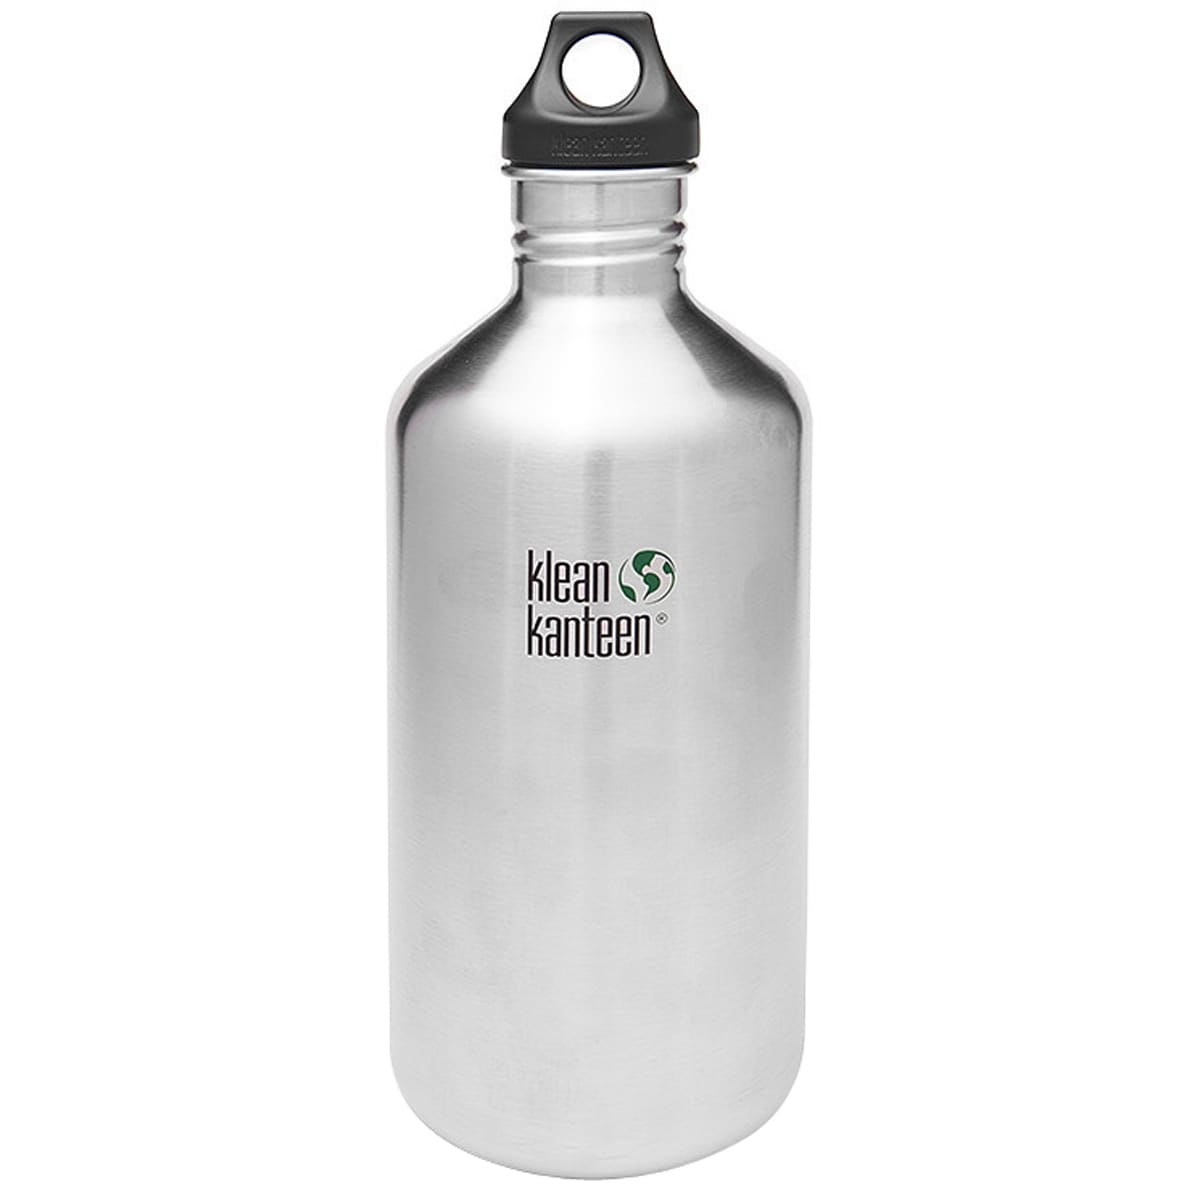 https://ak1.ostkcdn.com/images/products/is/images/direct/68ccc356c62c955c94e1b3eb0a61a91e32f61b3a/Klean-Kanteen-Classic-64-oz.-Single-Wall-Bottle-with-Loop-Cap-Brushed-Stainless.jpg